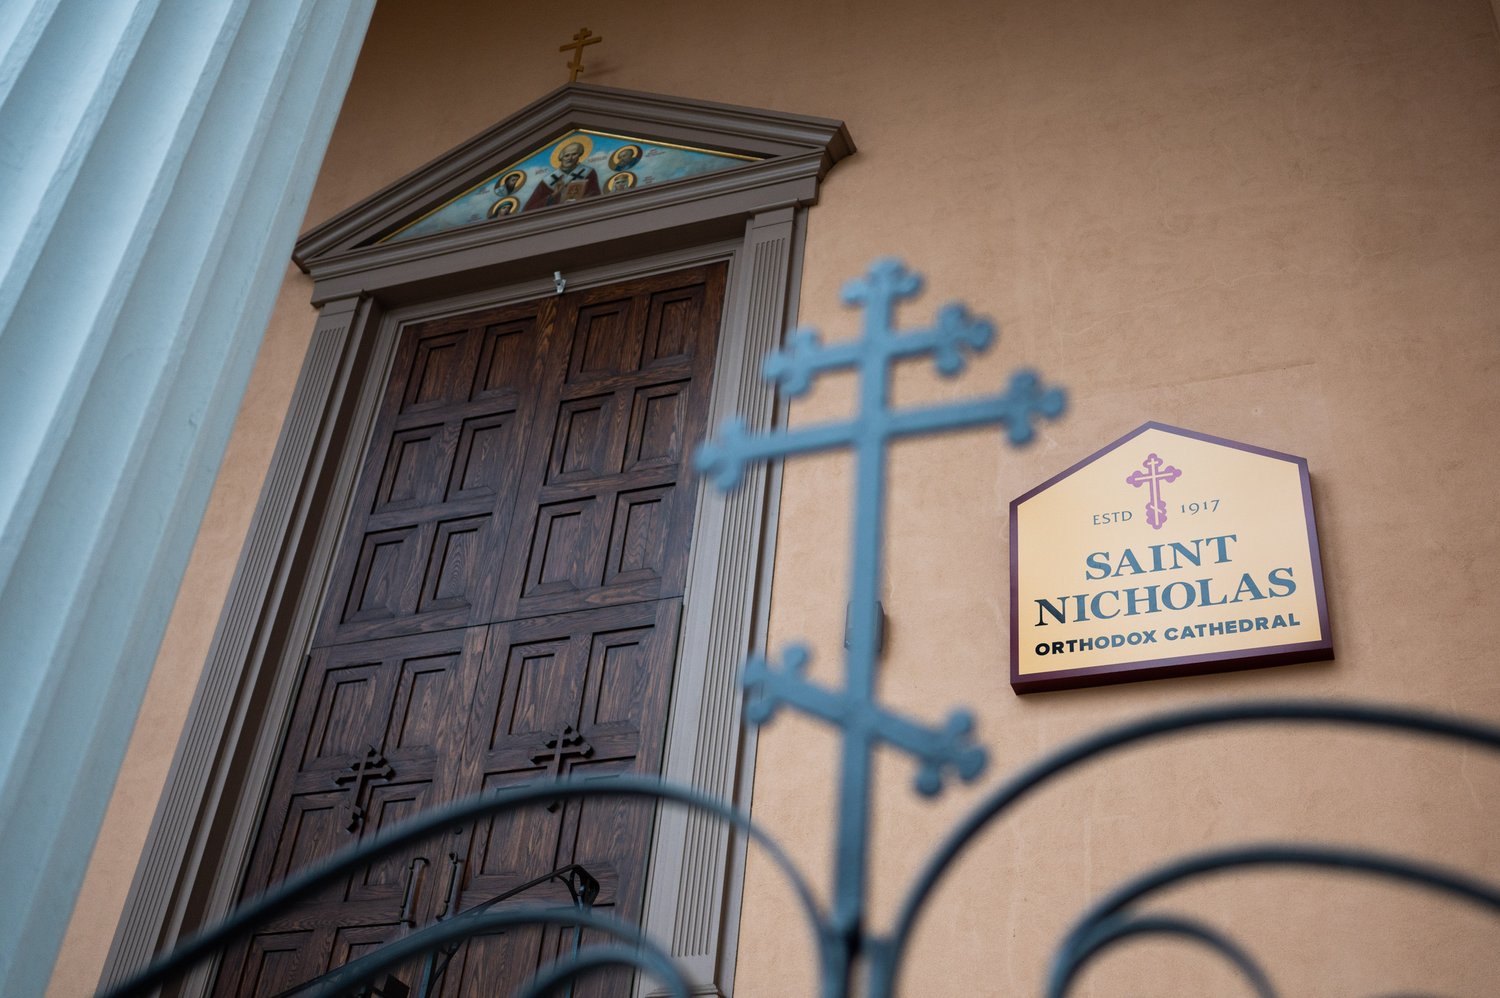   Saint Nicholas Orthodox Cathedral is located on 7th Street in Northern Liberties. Bishop Luke, the head of the church, has taken in 11 Ukrainian refugees throughout 2022 and they reside in a house located on the church’s grounds.  